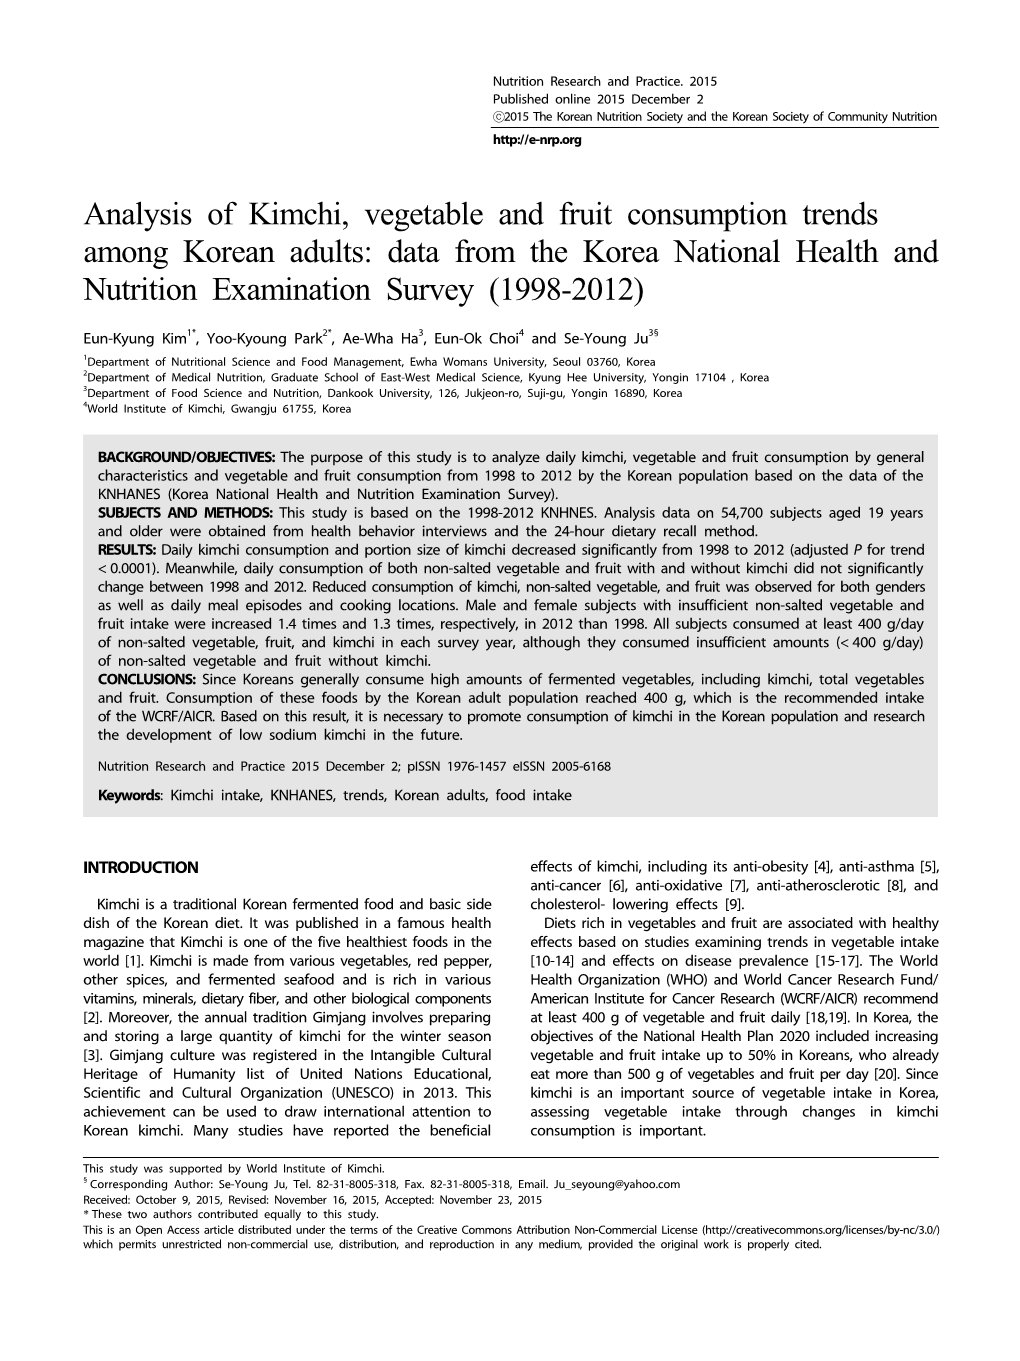 Analysis of Kimchi, Vegetable and Fruit Consumption Trends Among Korean Adults: Data from the Korea National Health and Nutrition Examination Survey (1998-2012)